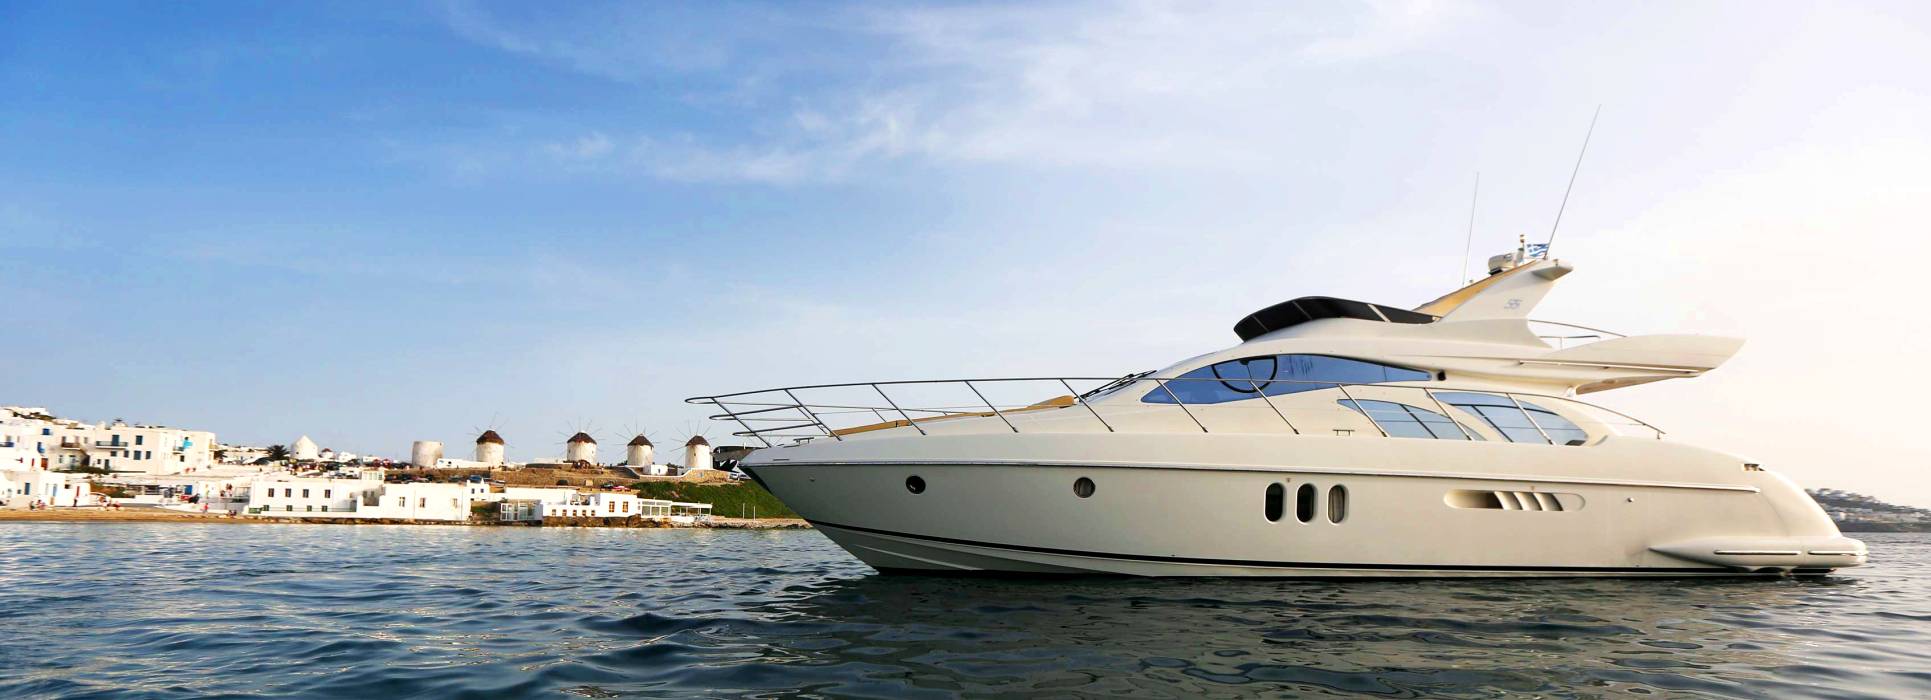 Mykonos Luxury Yacht Rental - Charter a Private Yacht for a day or multiday cruise